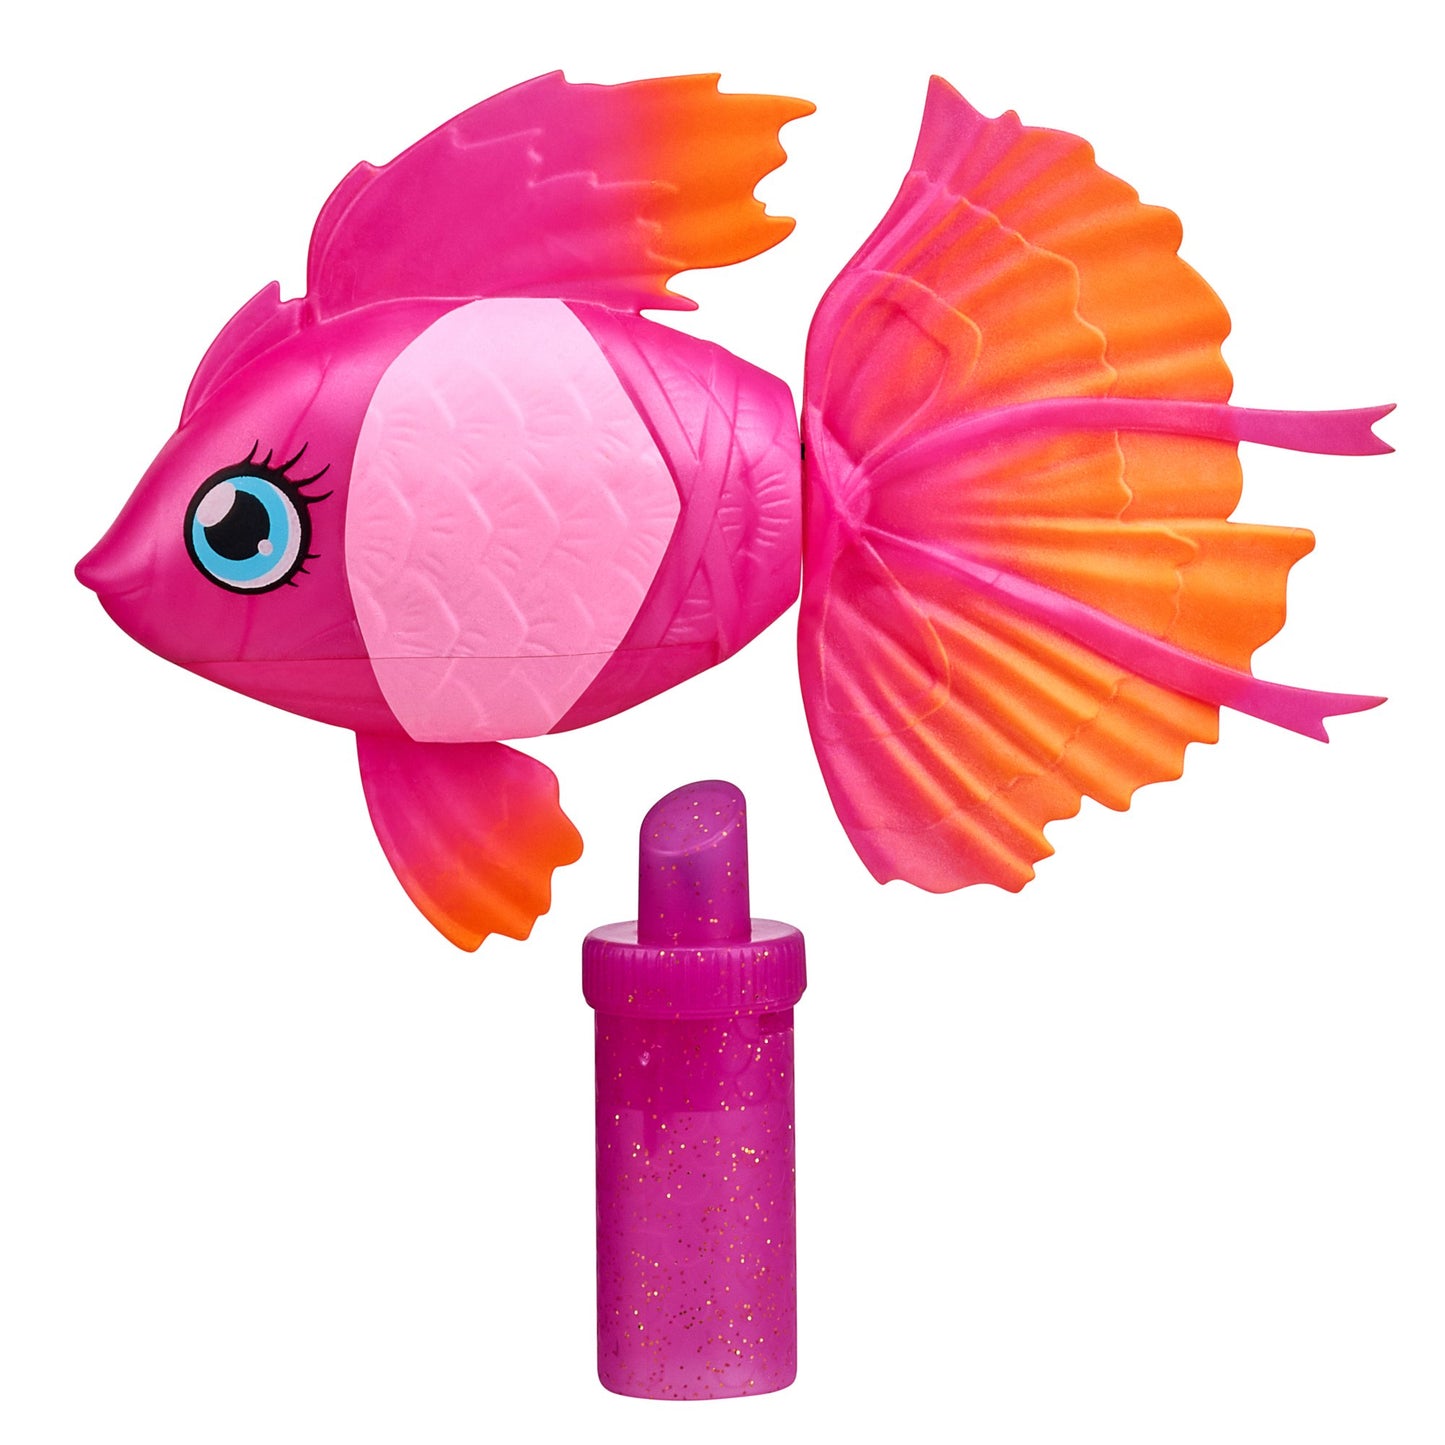 Little Live Pets Lil' Dippers Fish - Magical Water Activated Unboxing and Interactive Feeding Experience - Seaqueen, Bellariva, Furtail